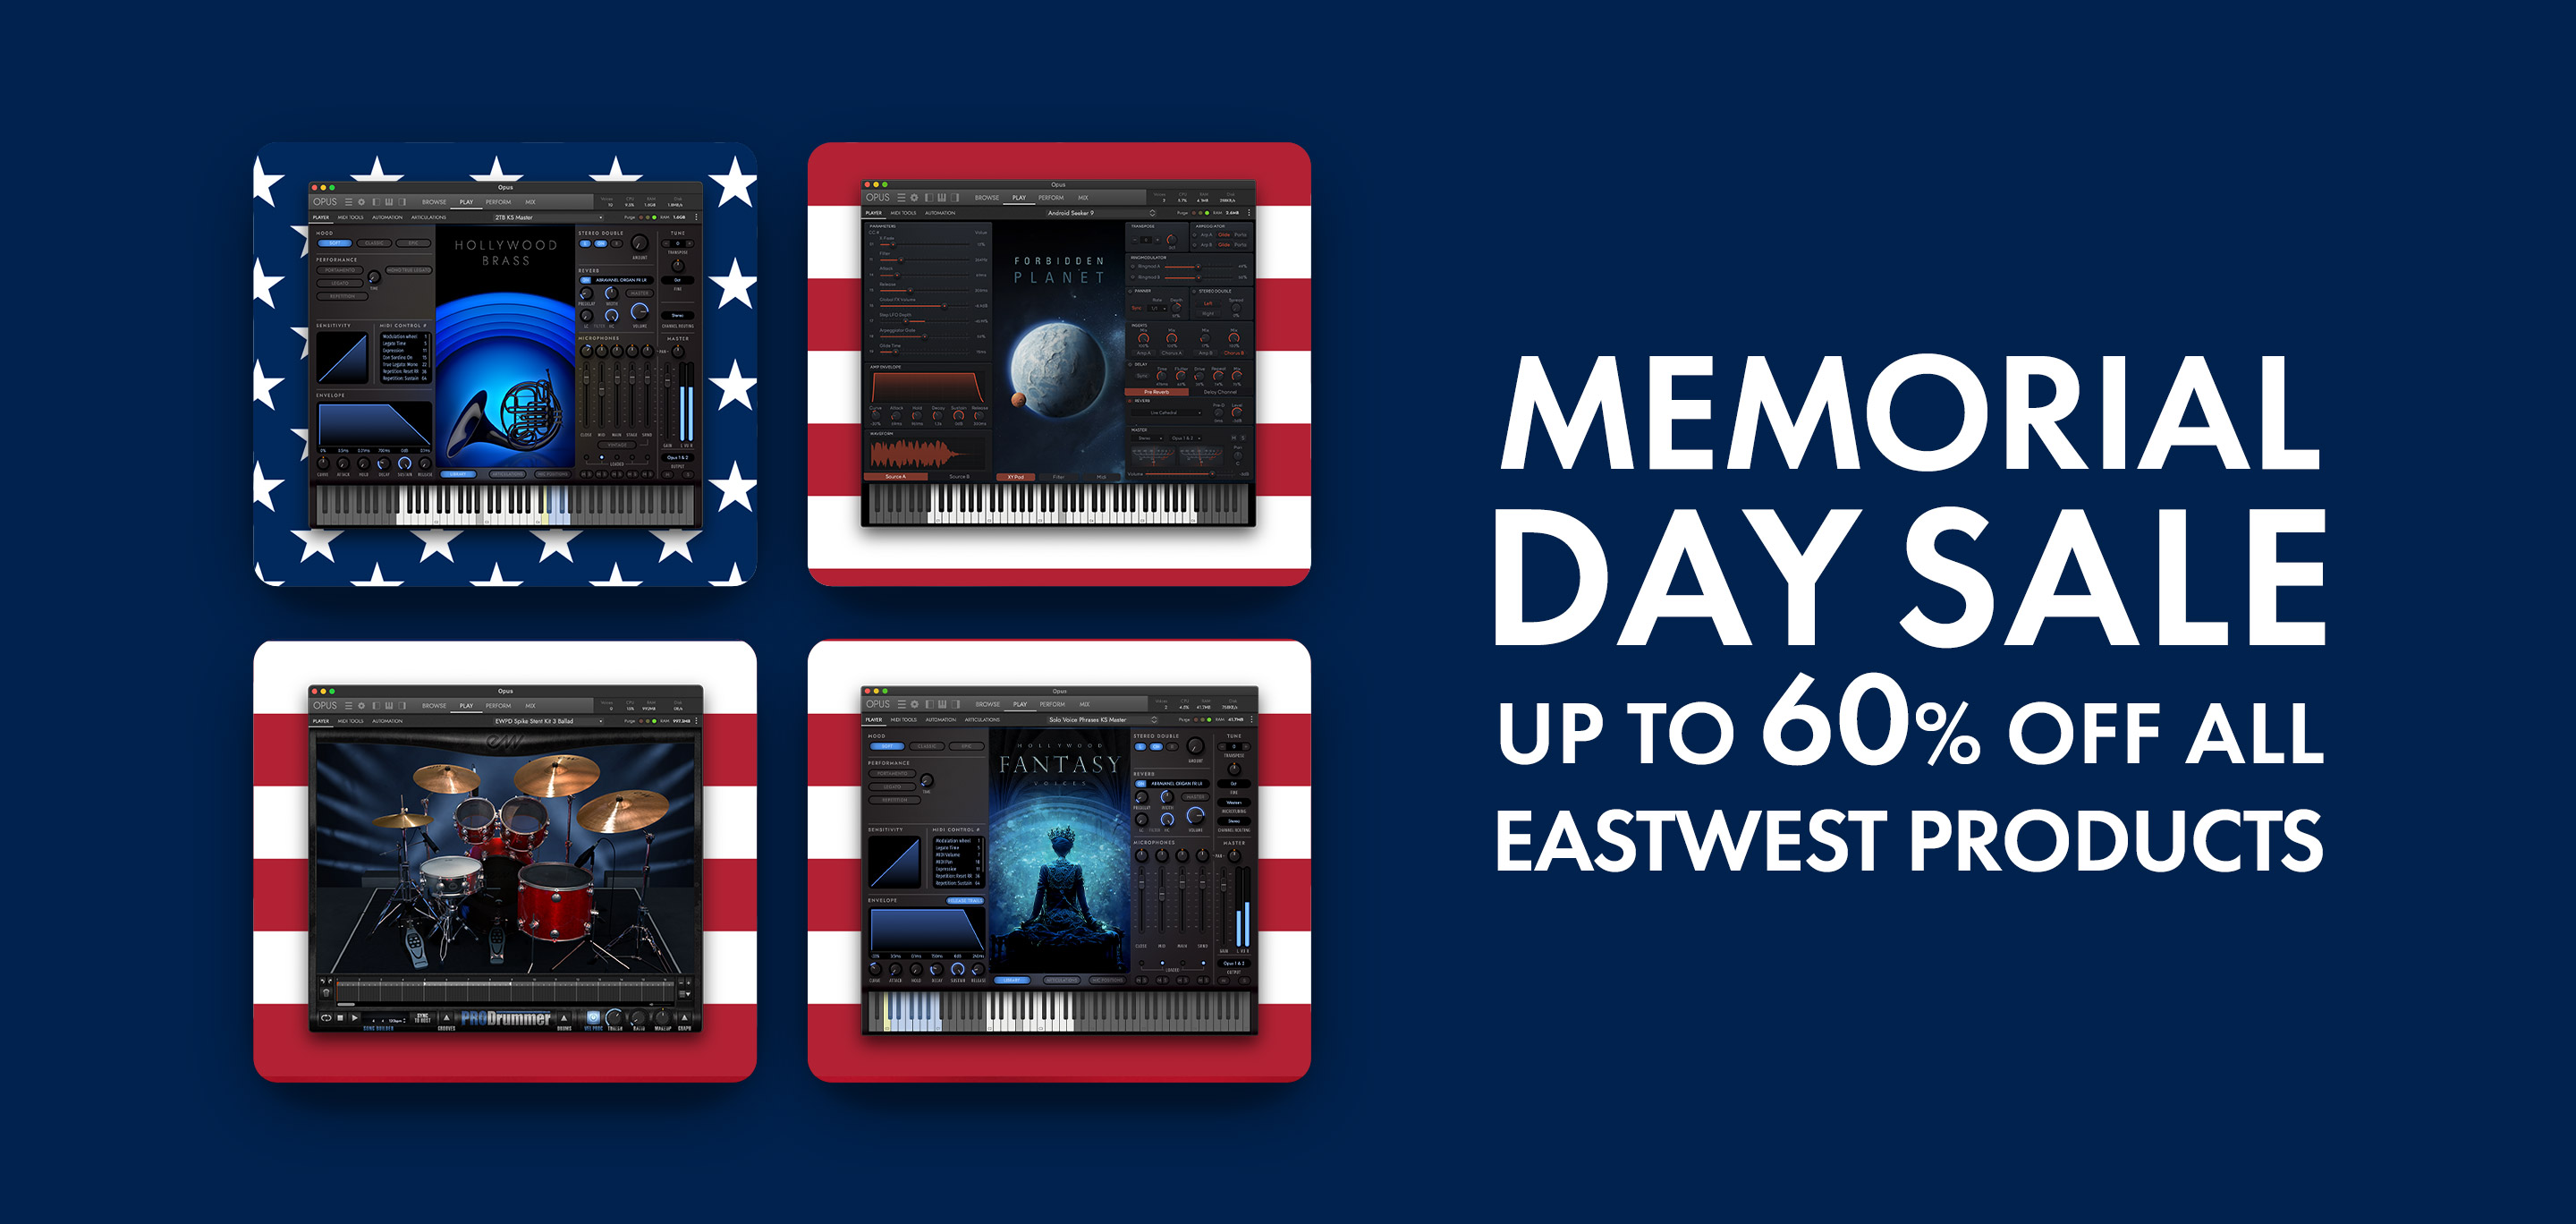 EastWest Memorial Day Sale - Up To 60% Off All EastWest Products